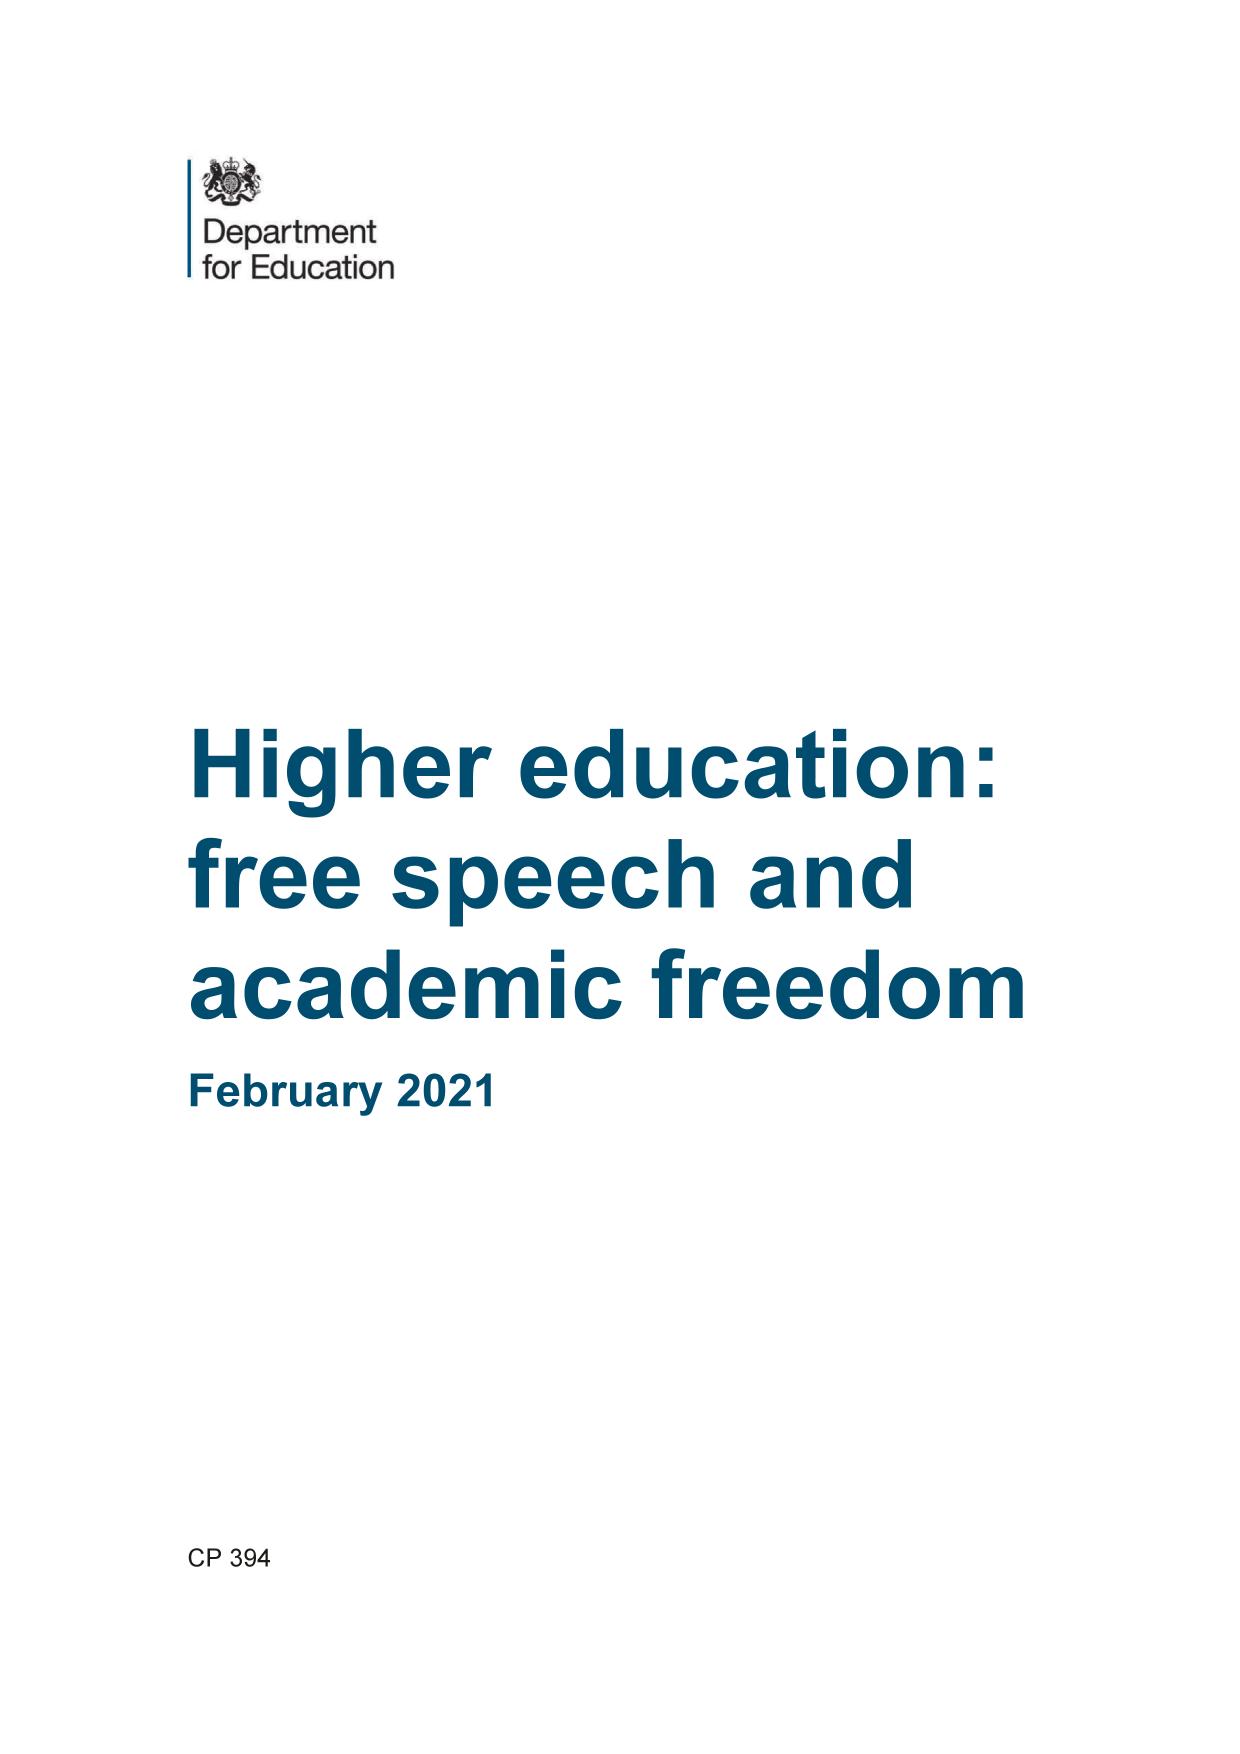 Higher education : free speech and academic freedom